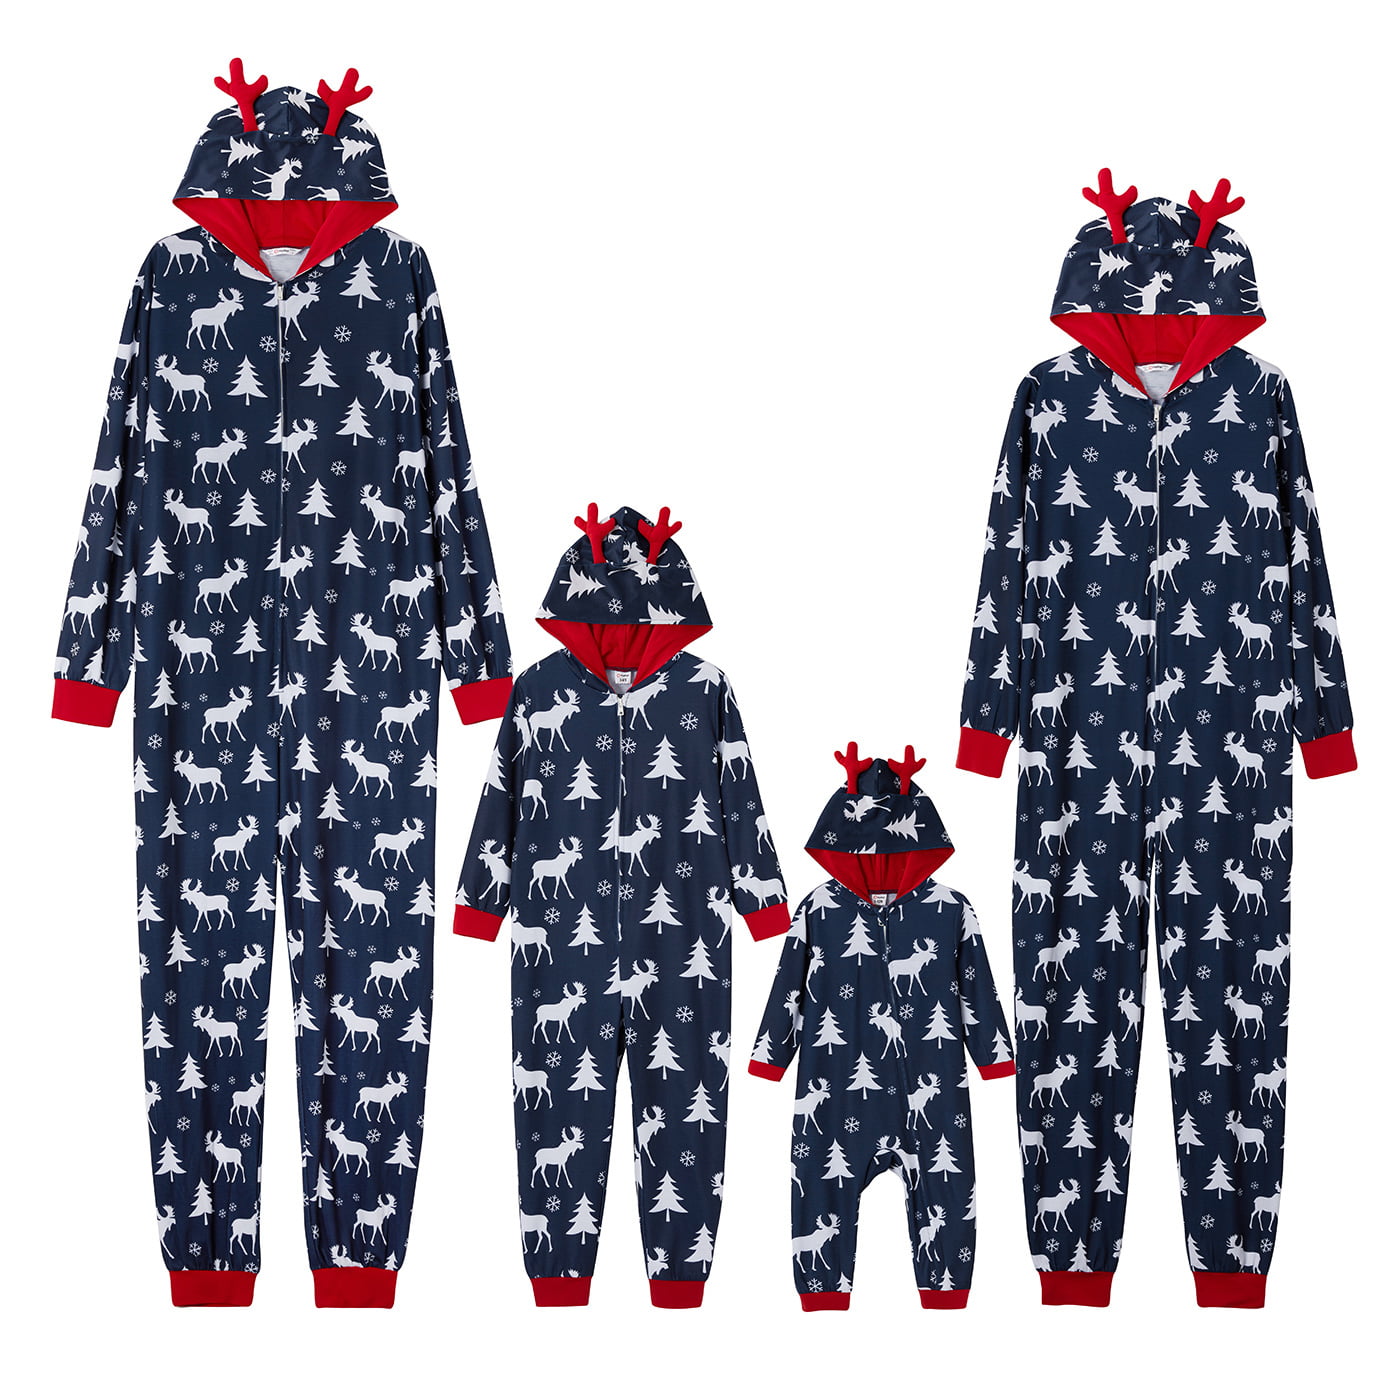 PatPat Blue Mosaic Family Matching Moose Print Christmas Hooded Onesies Pajamas (Flame Resistant),Unisex,Sizes Baby-Kids-Adult,2-Piece